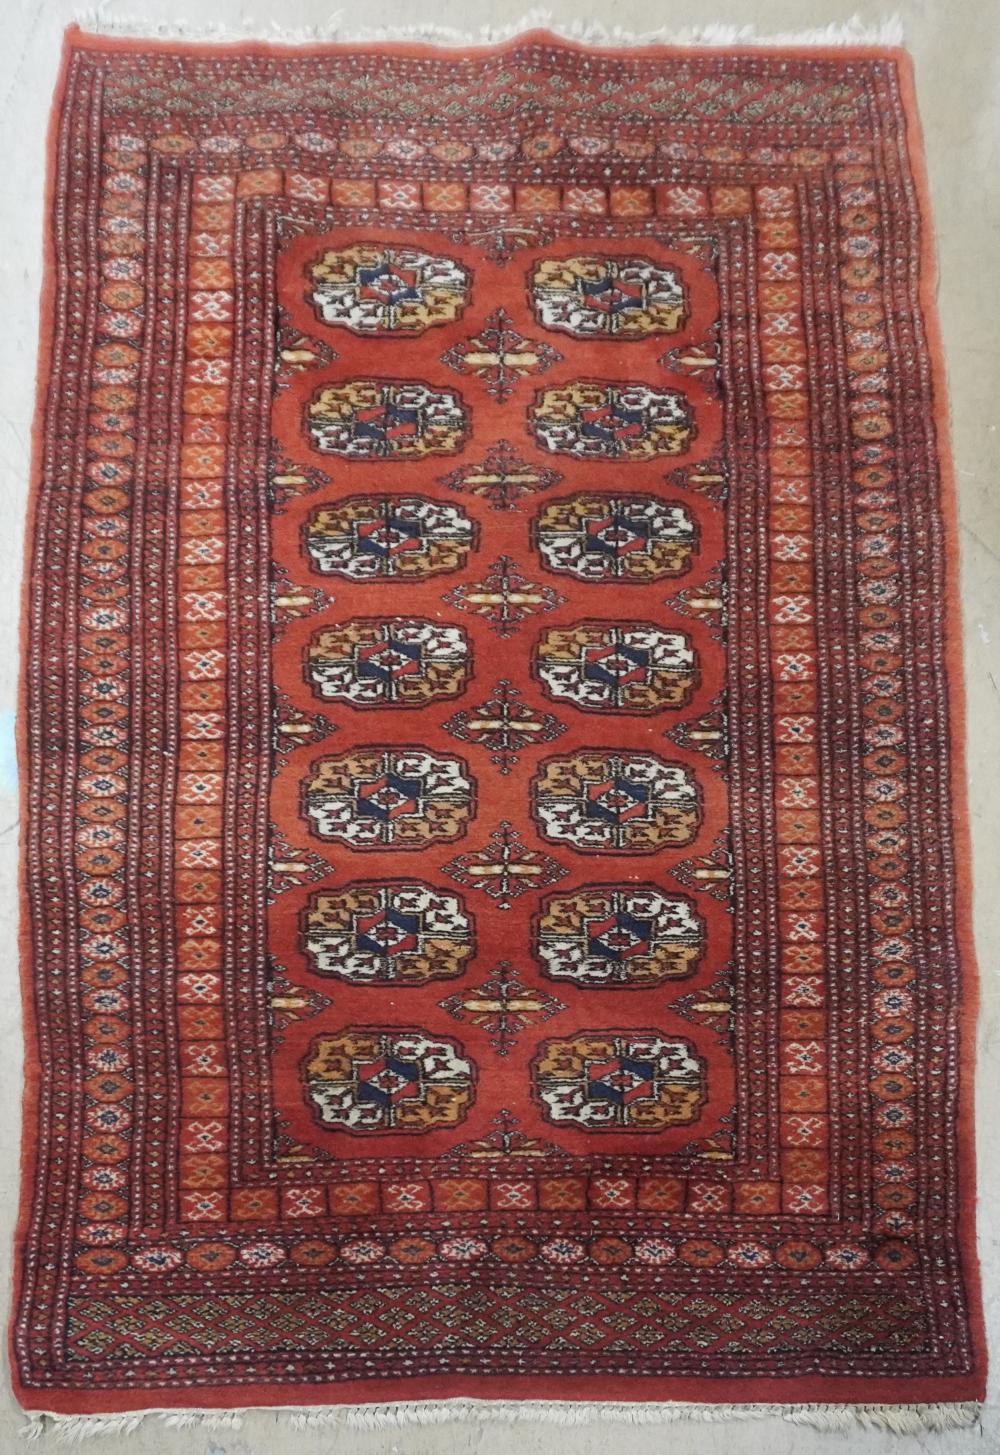 BOKHARA RUG, 5 FT 2 IN X 3 FT 2